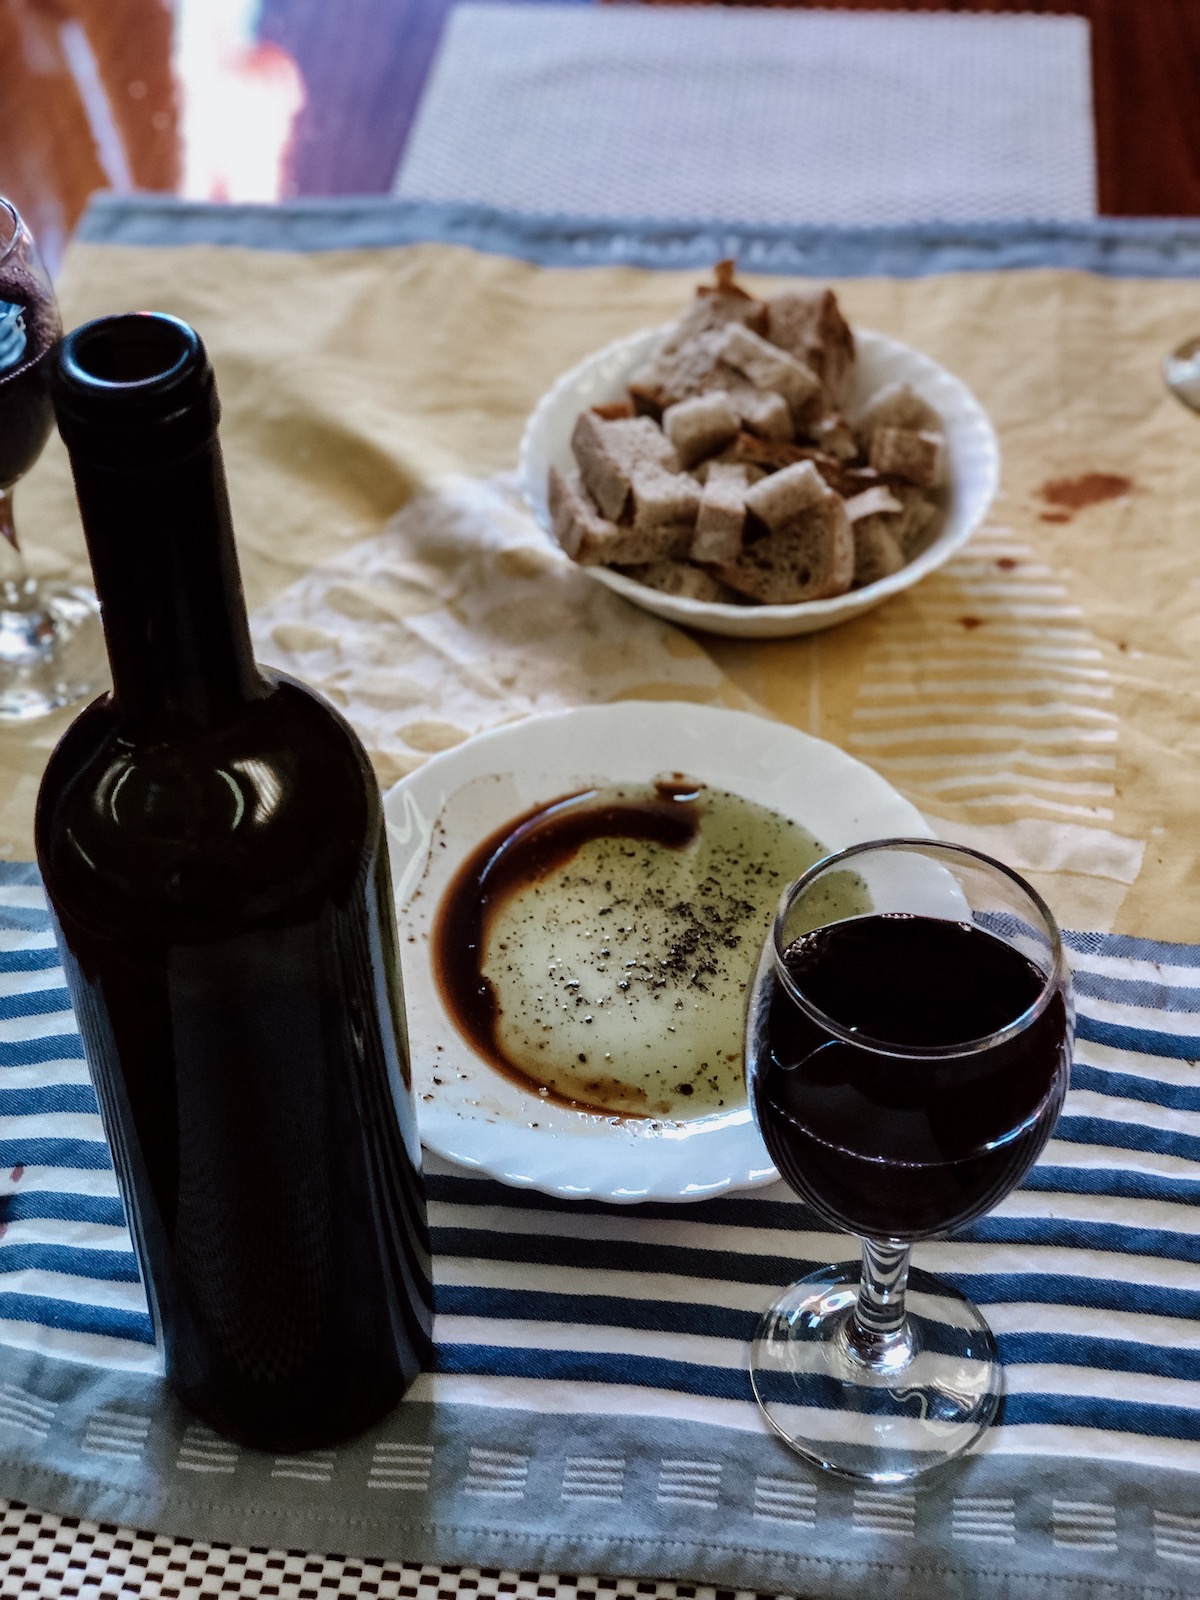 Balkan Wines - Our Off the Beaten Wine Path Experience | Cathedrals & Cafes Blog